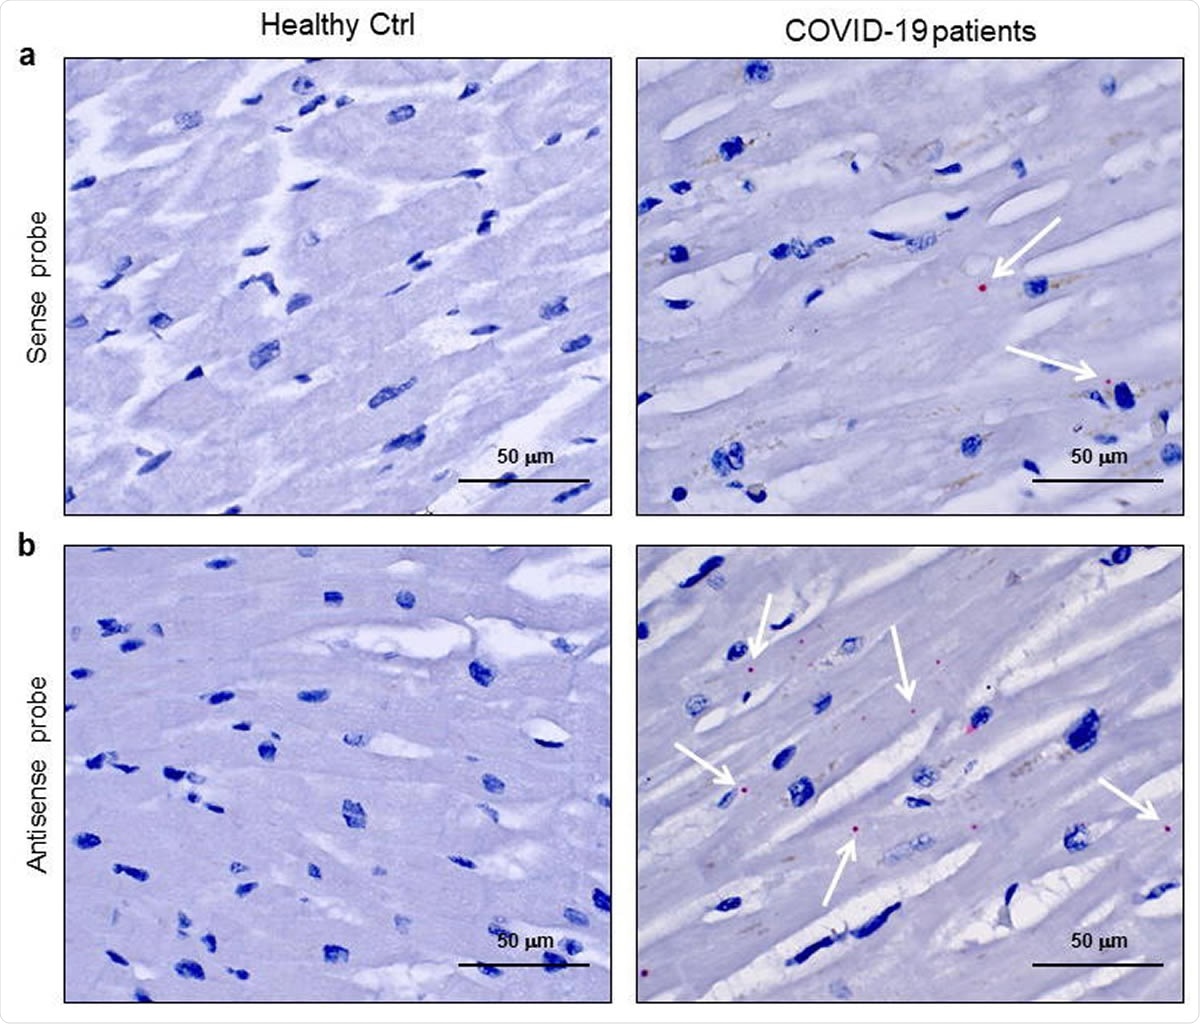 SARS-CoV-2 sense and antisense RNAs are localized in cardiomyocytes of COVID-19 patients.  ab) Representative of spatially resolved viral RNA detection by RNAScope assay on 3 μm slides of formalin-fixed paraffin-embedded left ventricle specimens from healthy controls (Healthy Ctrl, left panel) and COVID-19 patients (COVID-19, middle and right panels). Image for SARS-CoV-2 sense (a) and antisense (b) probes for spike protein RNA sequencing.  Fast Red dots indicate the presence of viral RNA (white arrow).  Nuclei are counterstained with hematoxylin.  Magnification as a scale bar.